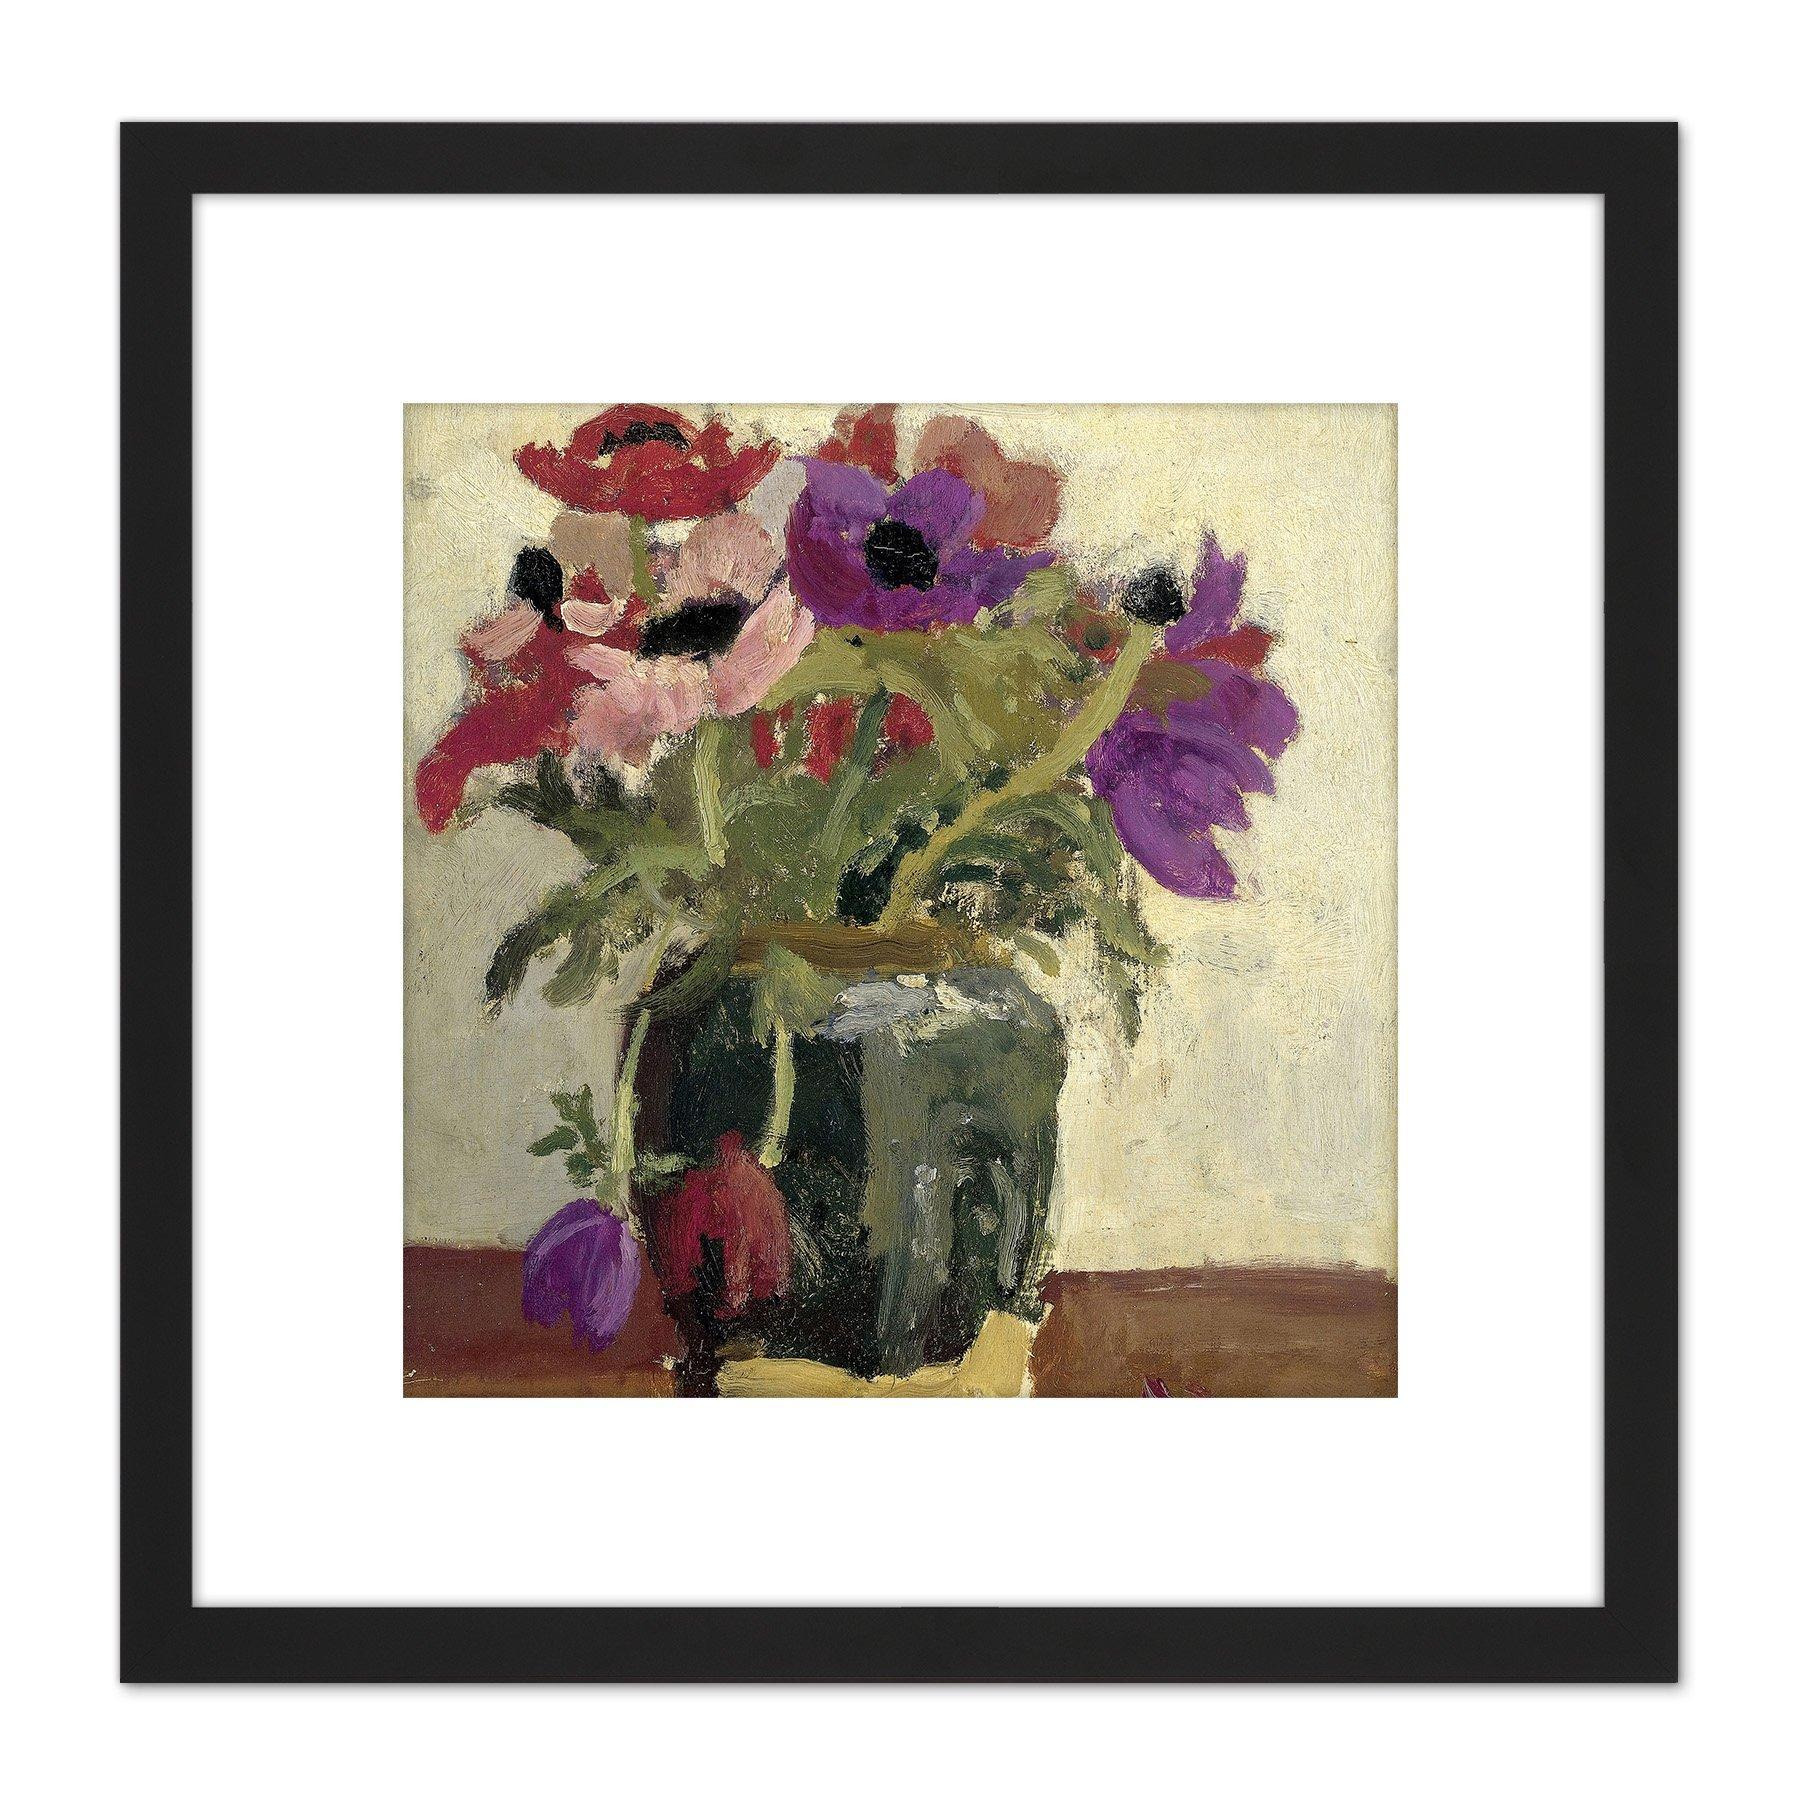 Breitner Ginger Pot With Anemones Painting 8X8 Inch Square Wooden Framed Wall Art Print Picture with Mount - image 1